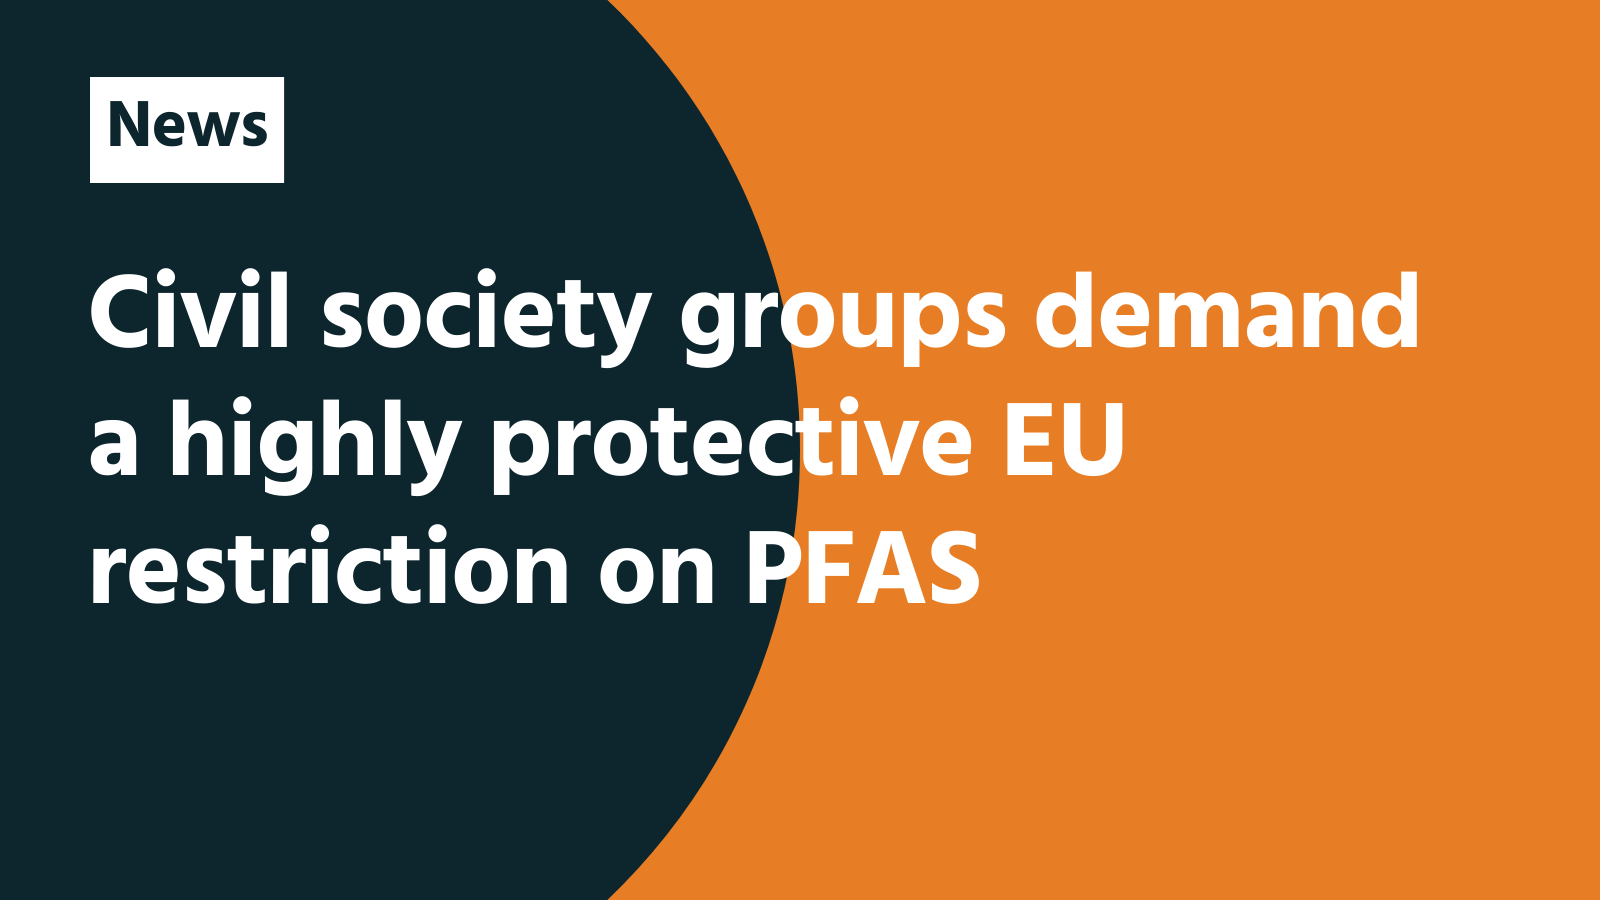 Civil society groups demand a highly protective EU restriction on PFAS